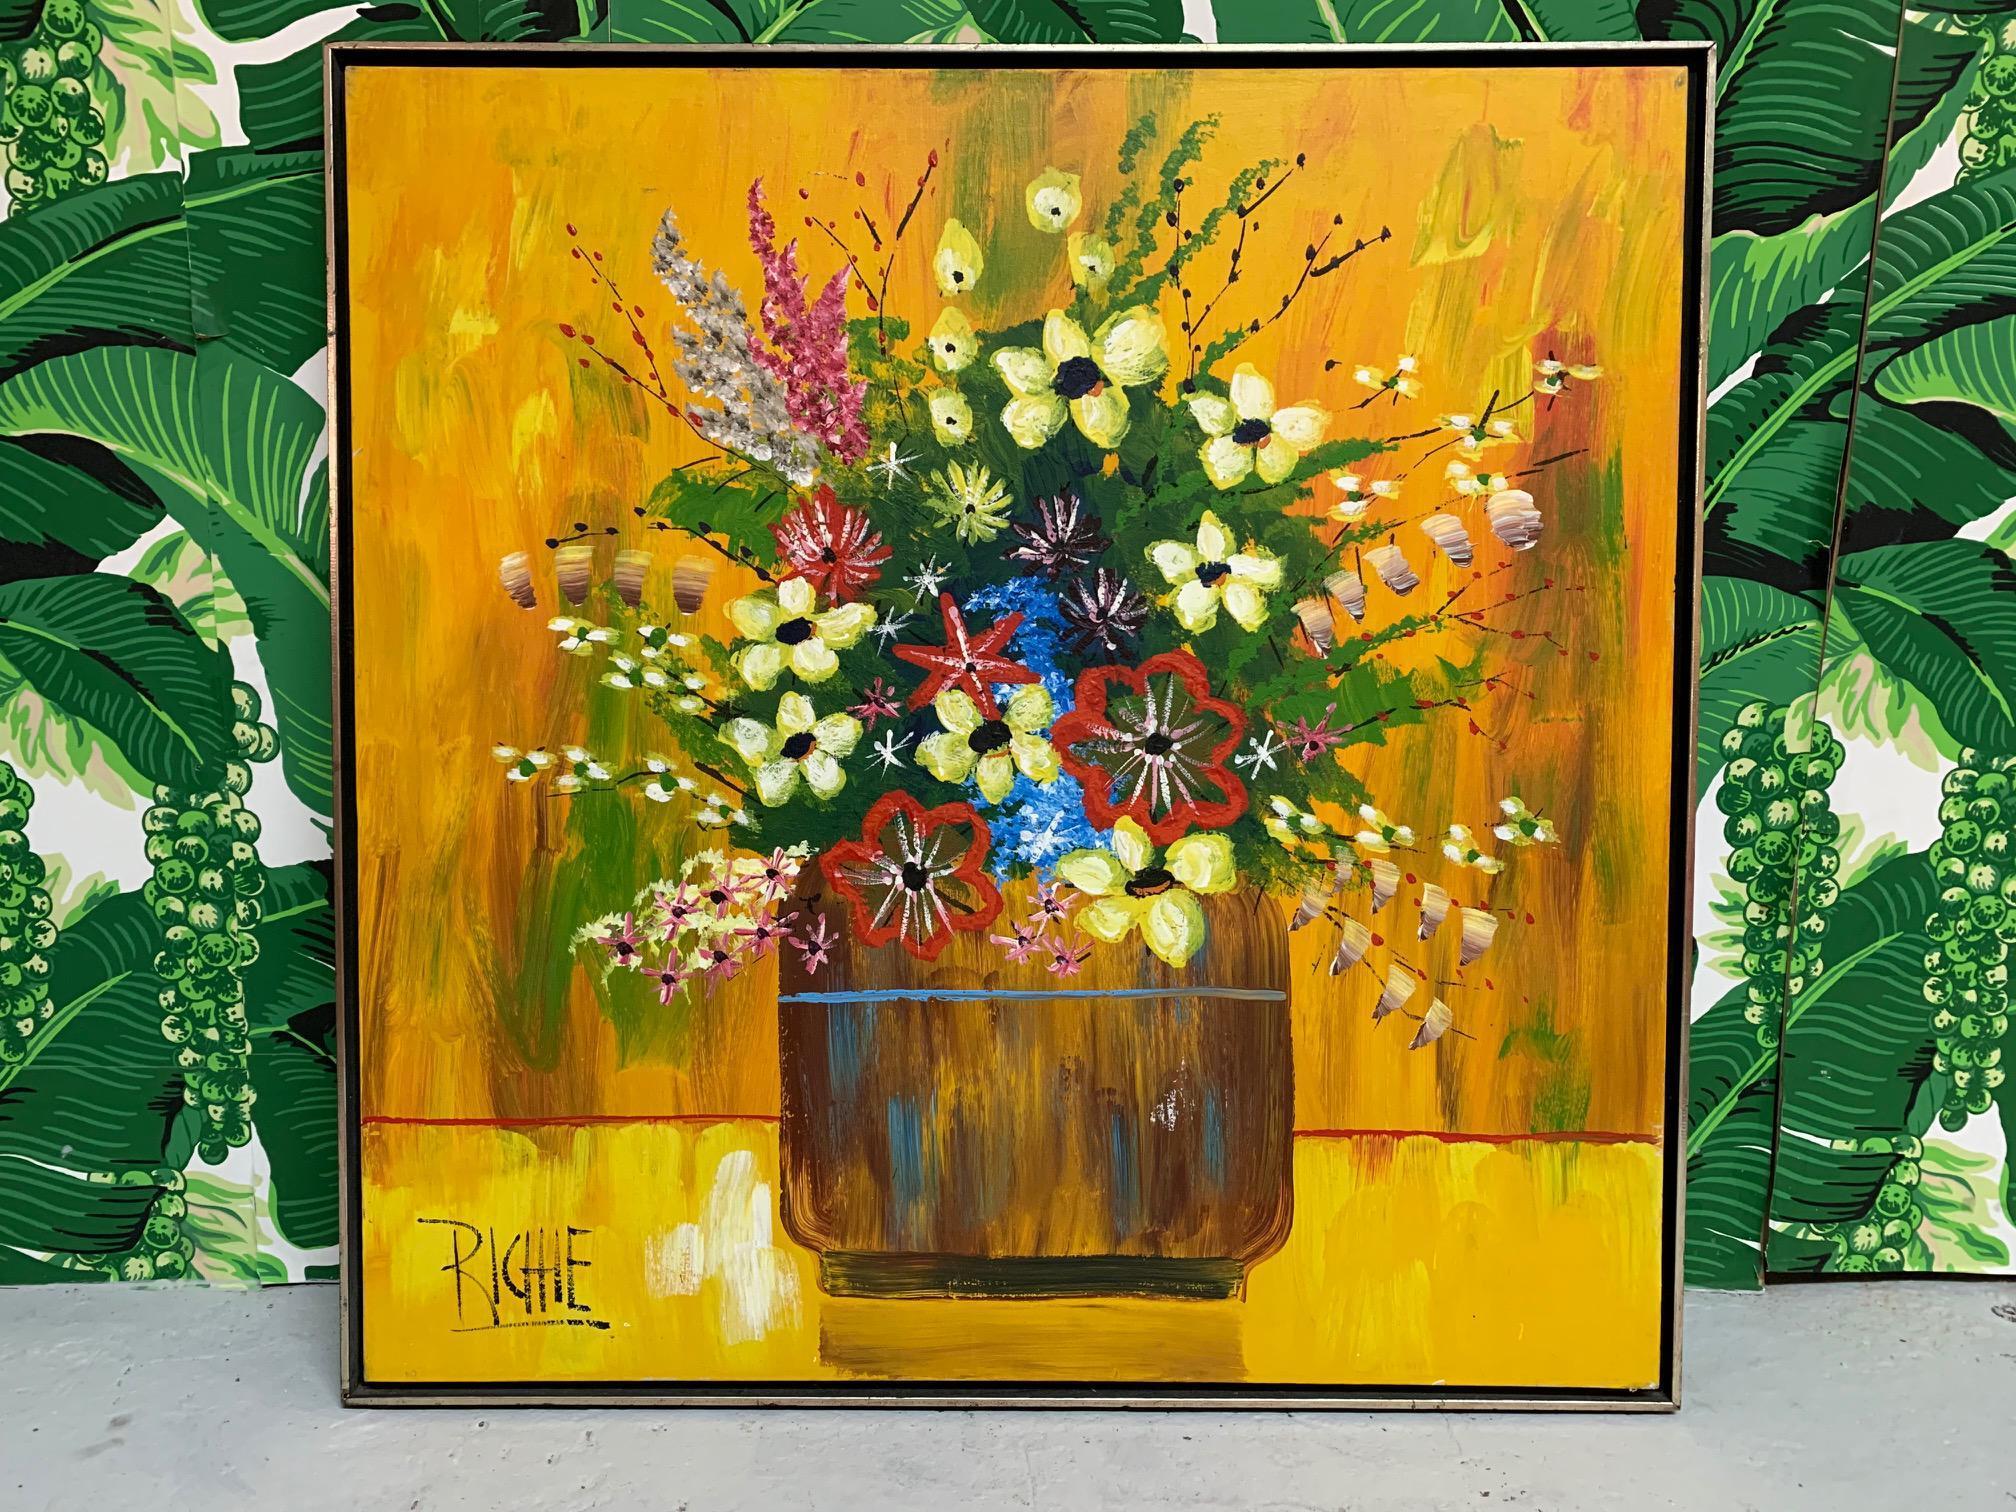 Large framed acrylic on canvas in a floral motif by artist Richie. Good condition with imperfections consistent with age, see photos for condition details.
For a shipping quote to your exact zip code, please message us.
